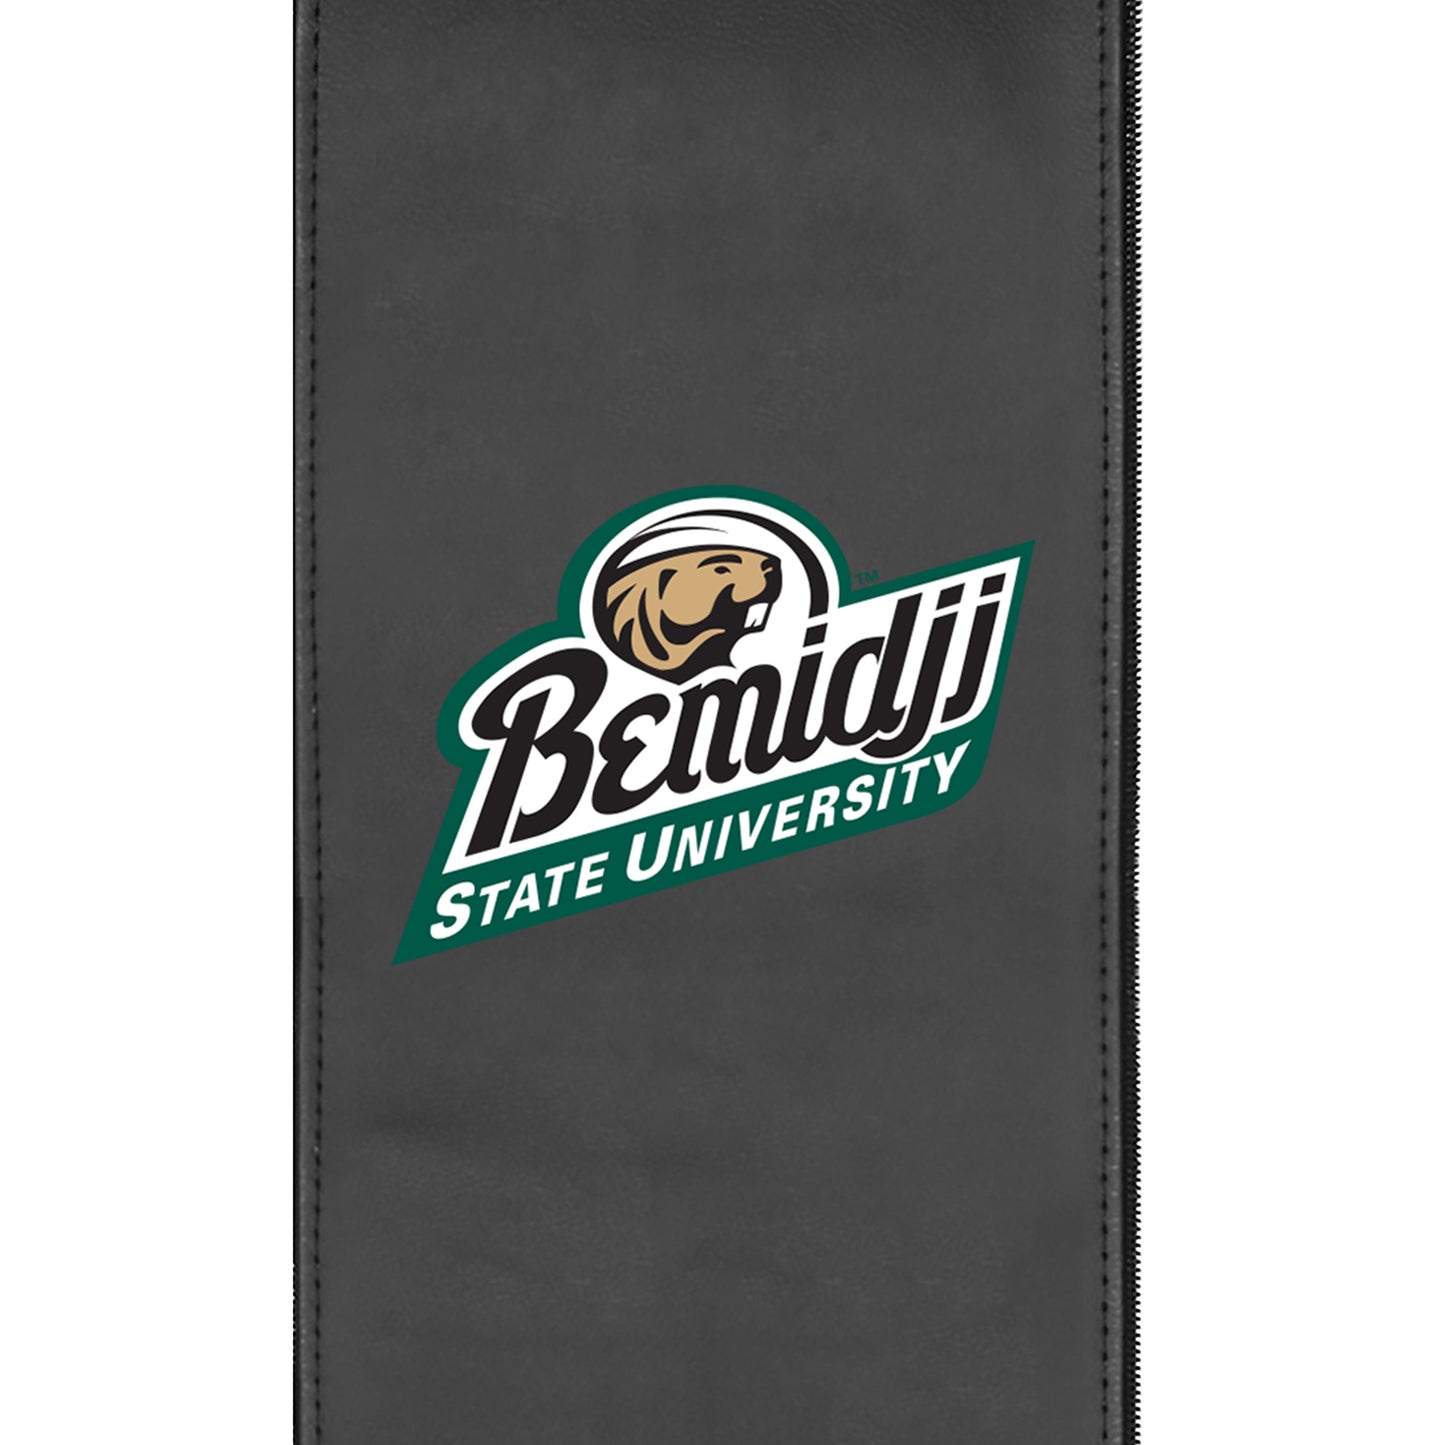 Stealth Power Plus Recliner with Bemidji State University Secondary Logo